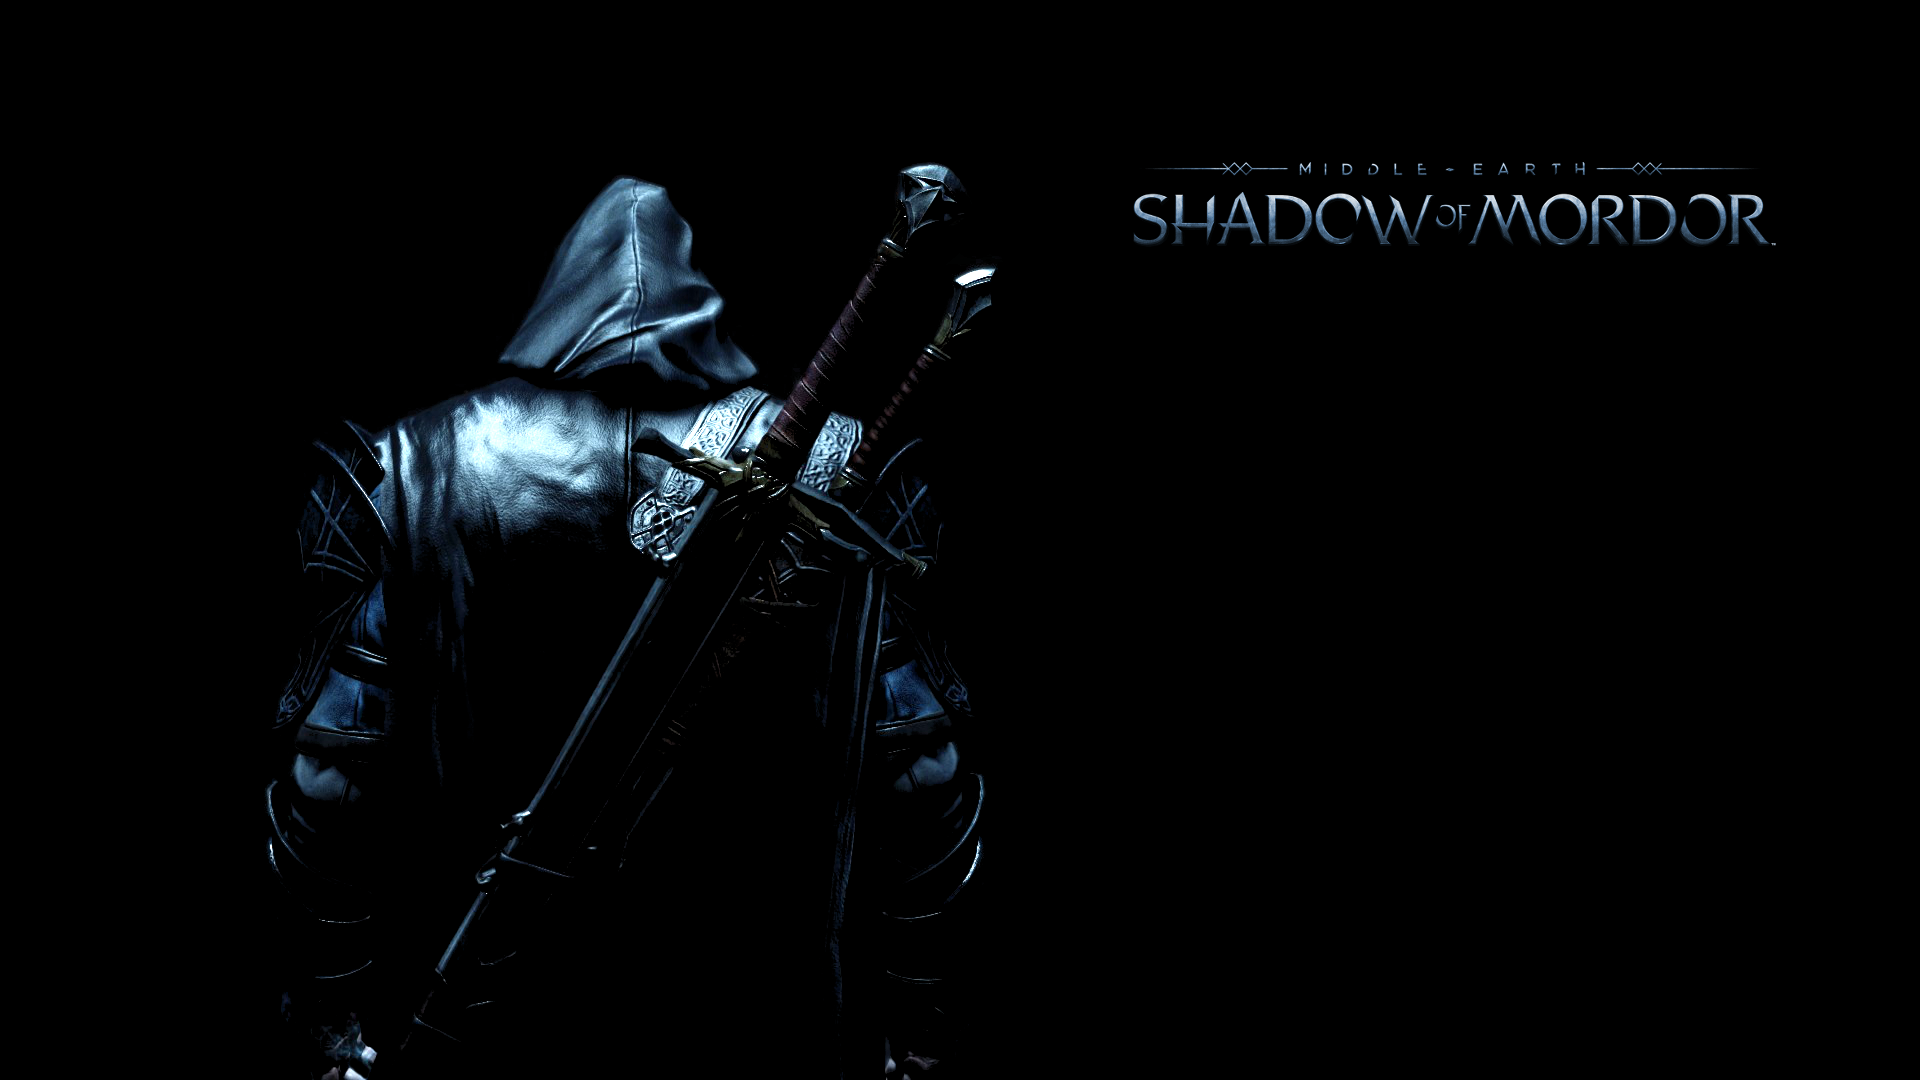 100+ Middle-earth: Shadow of Mordor HD Wallpapers and Backgrounds